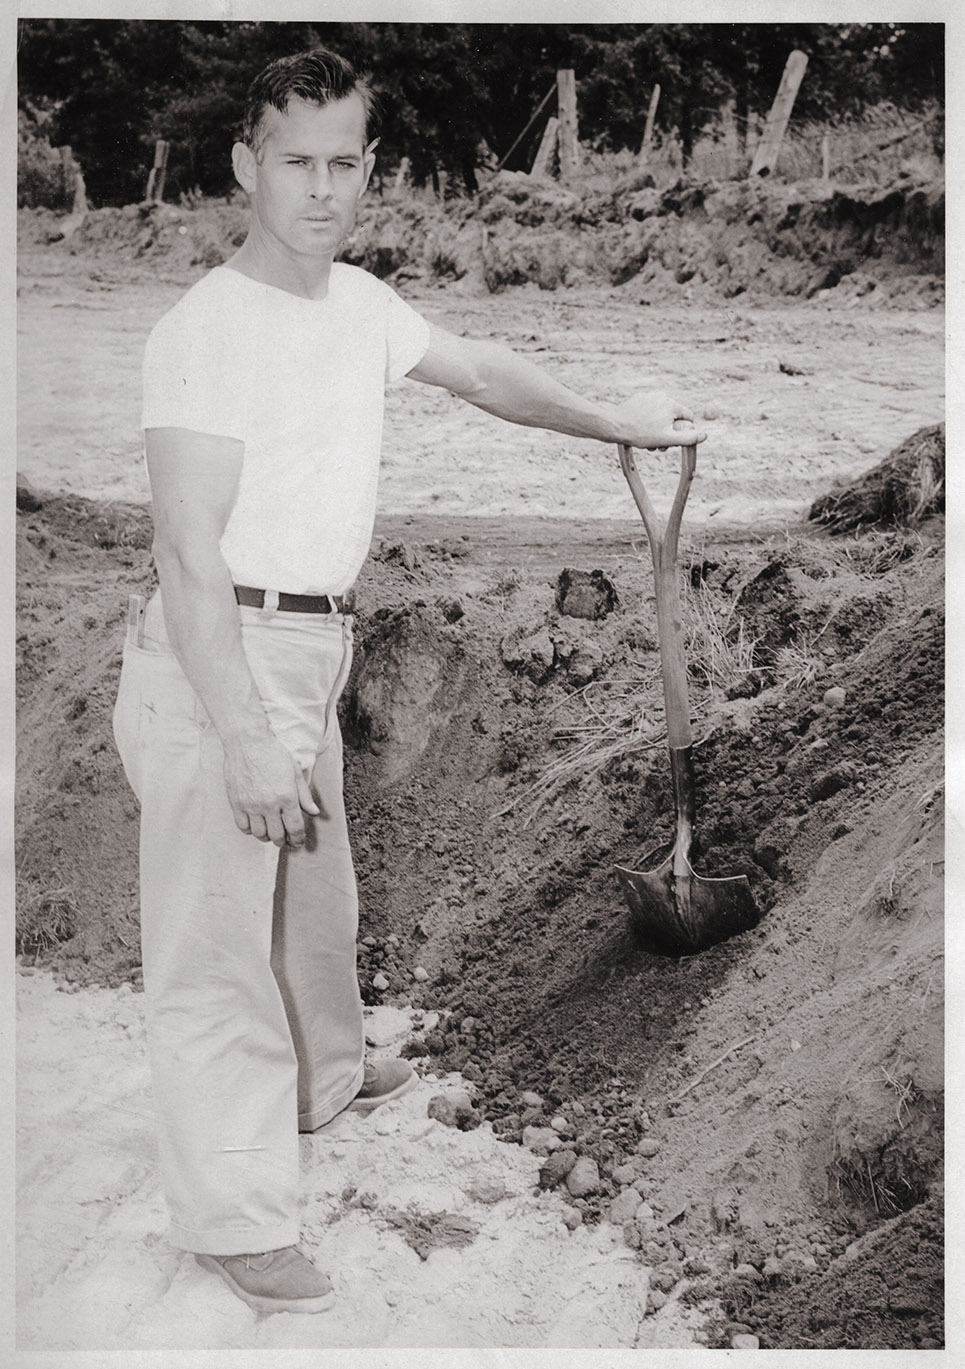 Depiction of Terry B. Kinney at groundbreaking, July 1954